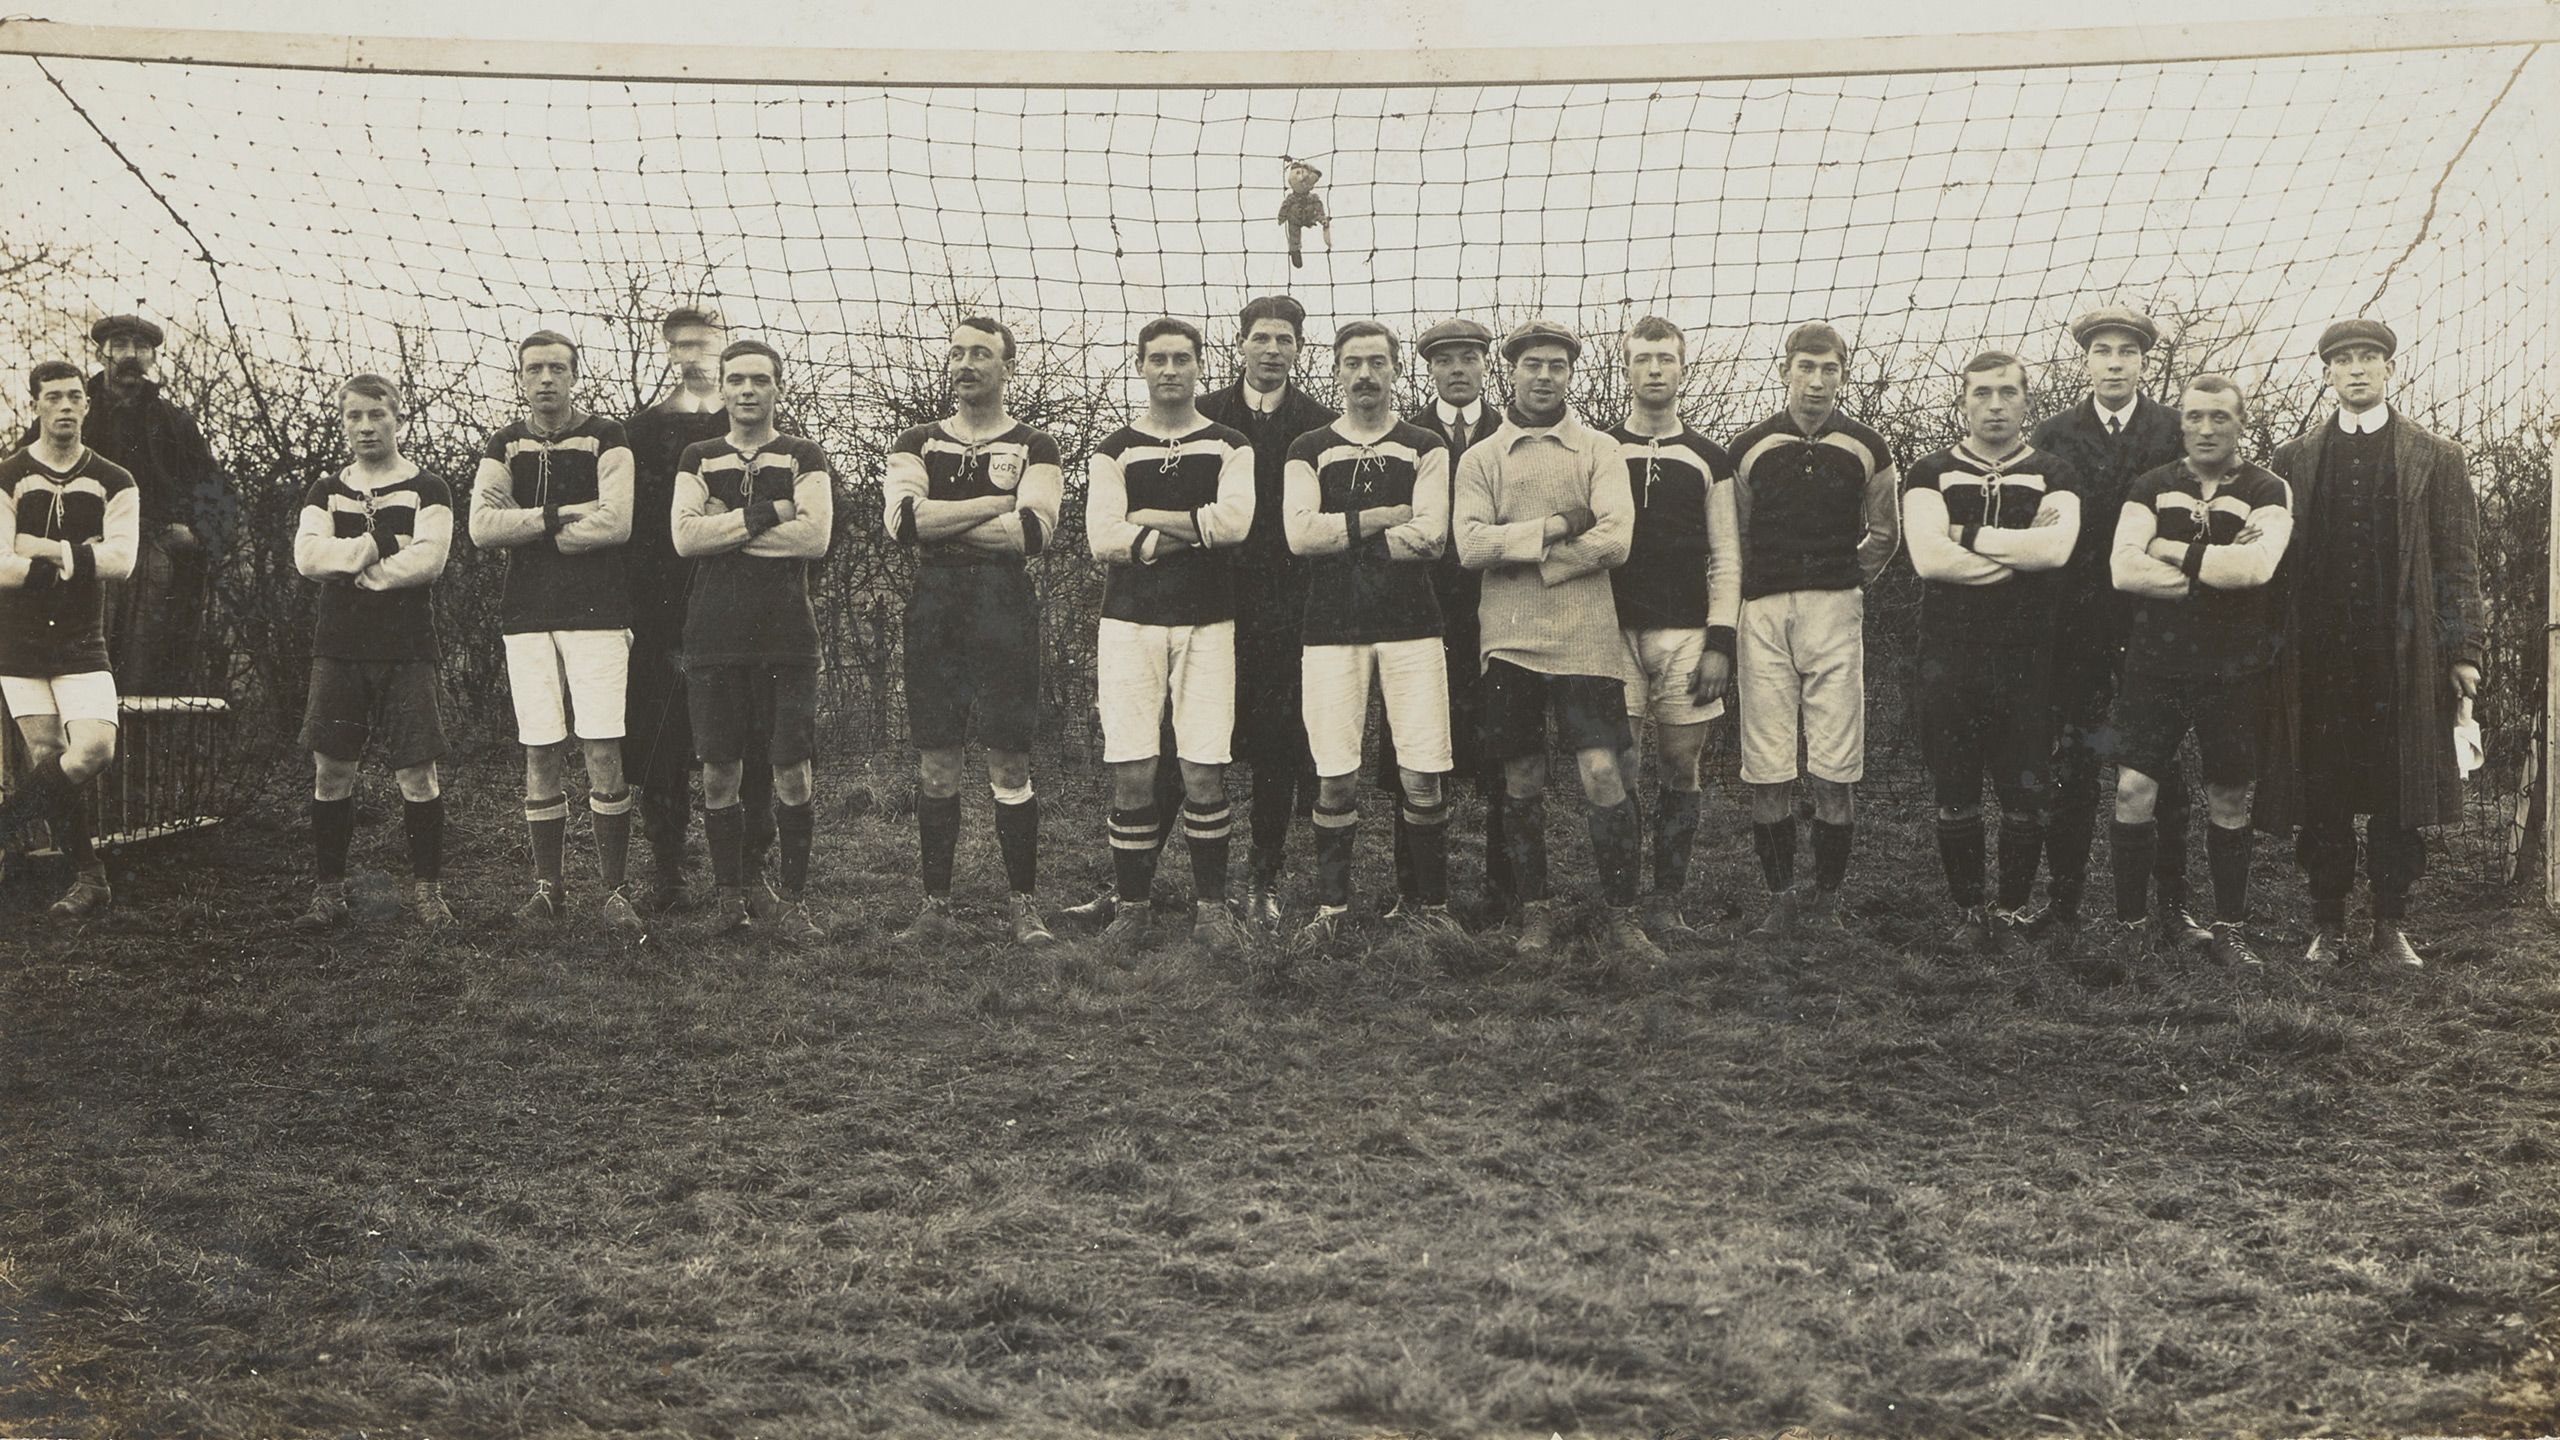 A b&w photo from early 1900s showing the Cambridge football team stood in front of a goal